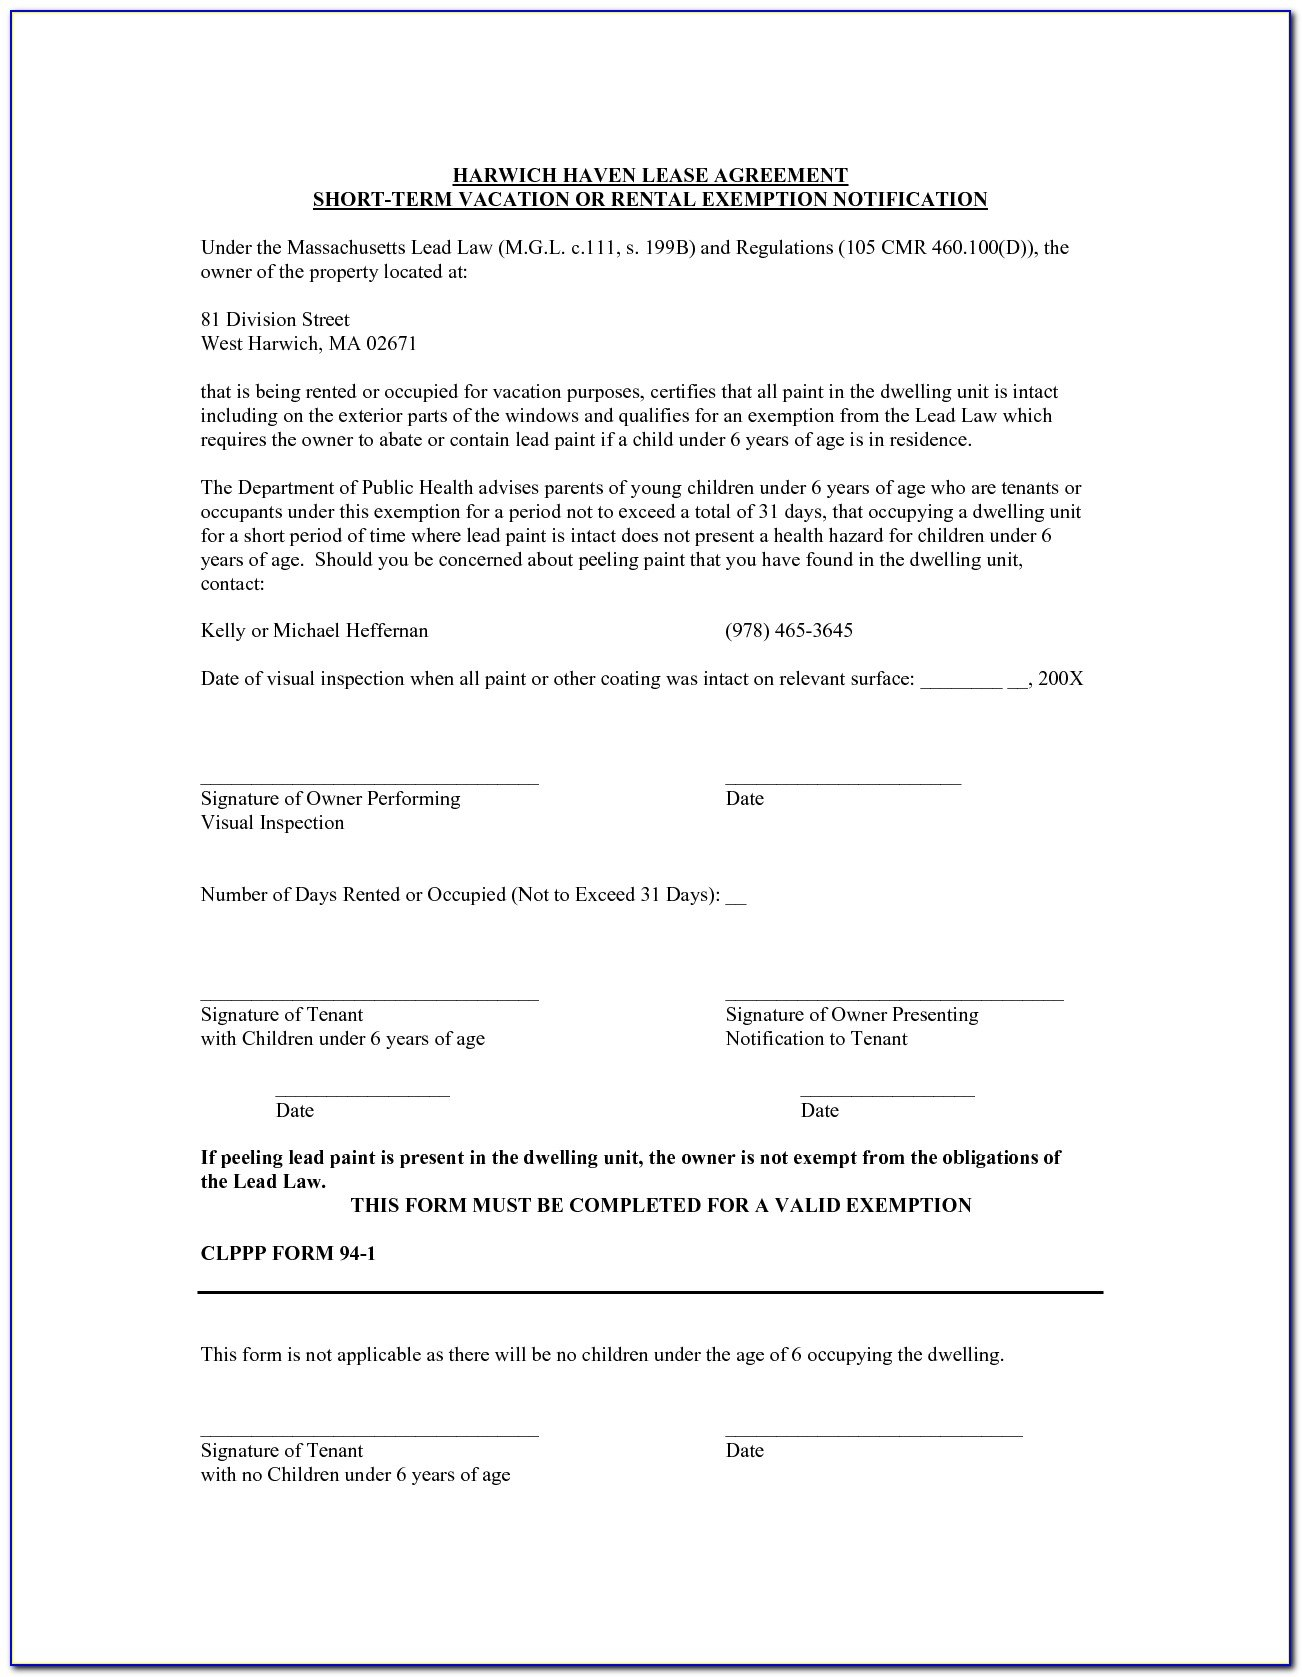 Short Term Vacation Rental Agreement Form  Form  Resume Examples inside Short Term Vacation Rental Agreement Template